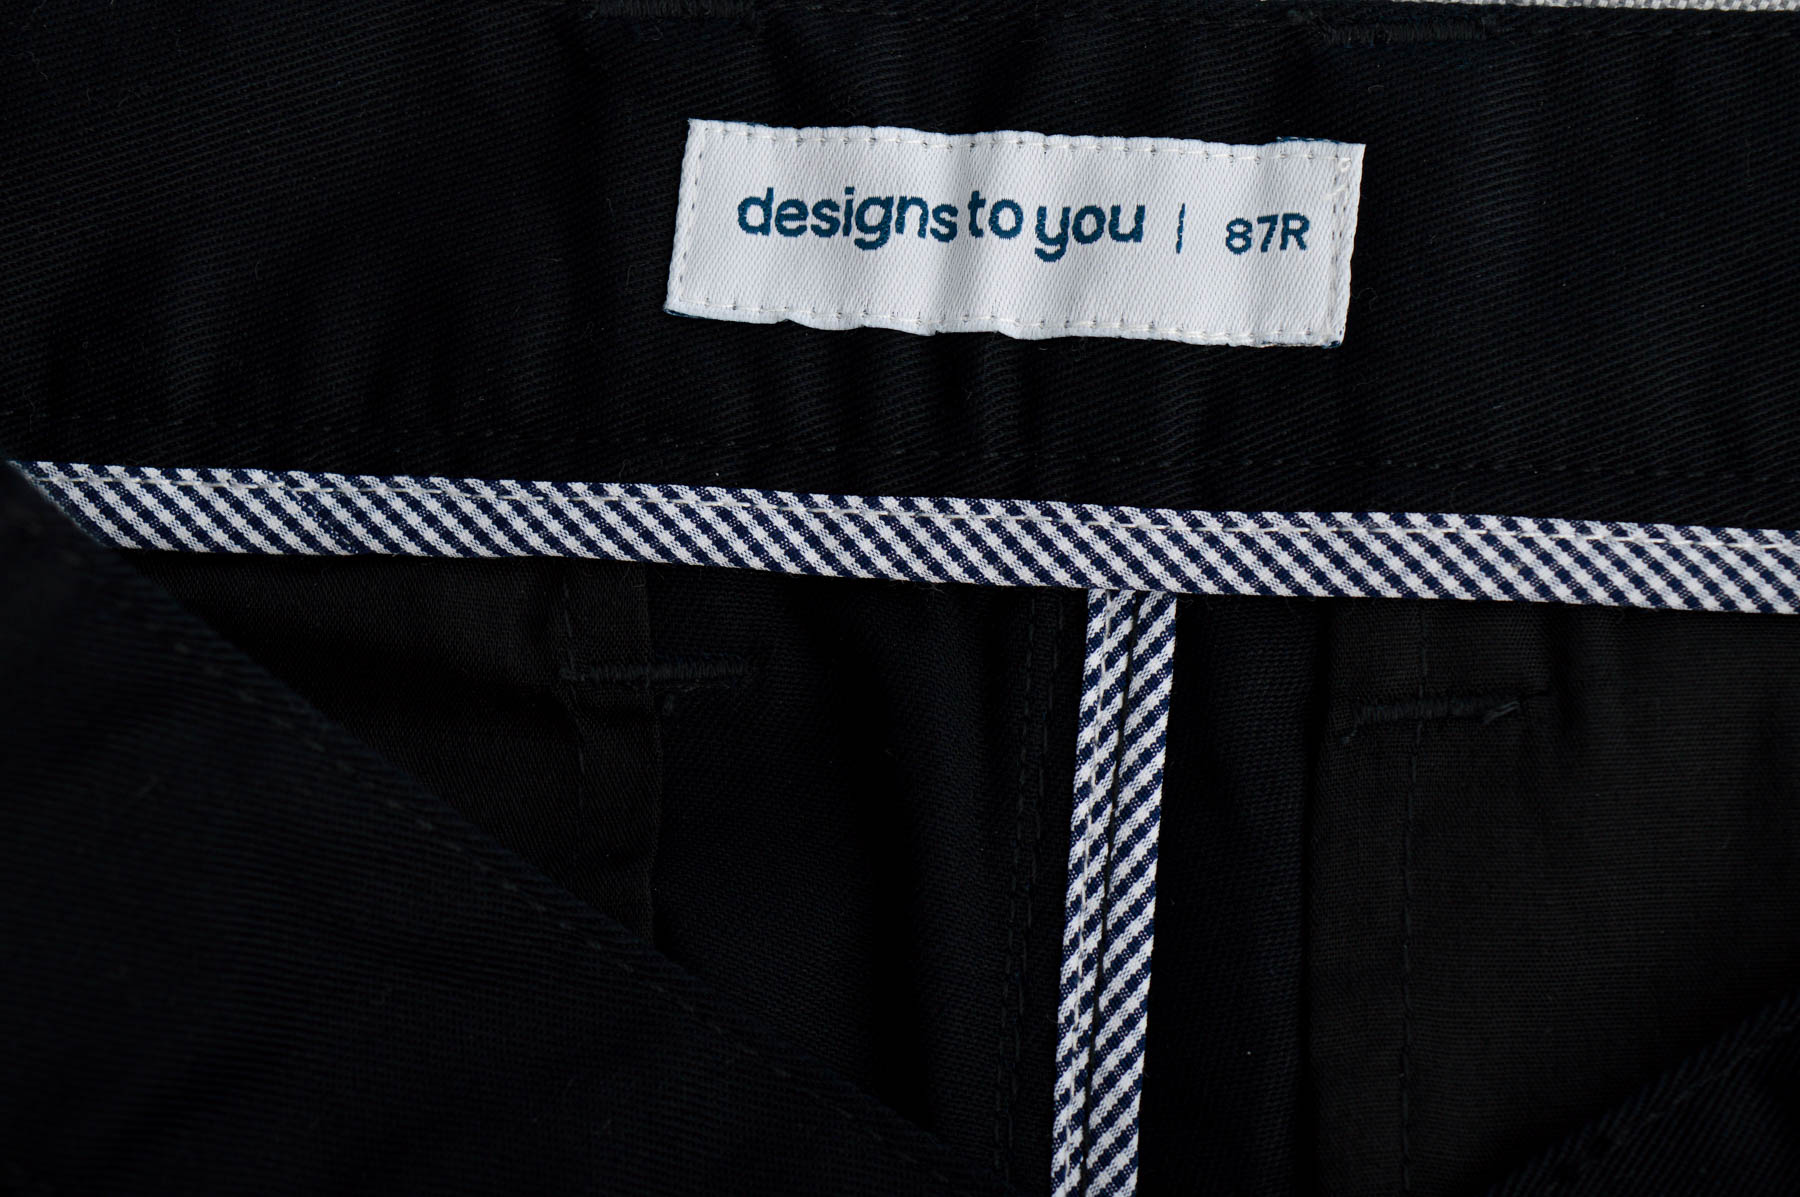 Men's trousers - Designs To You - 2